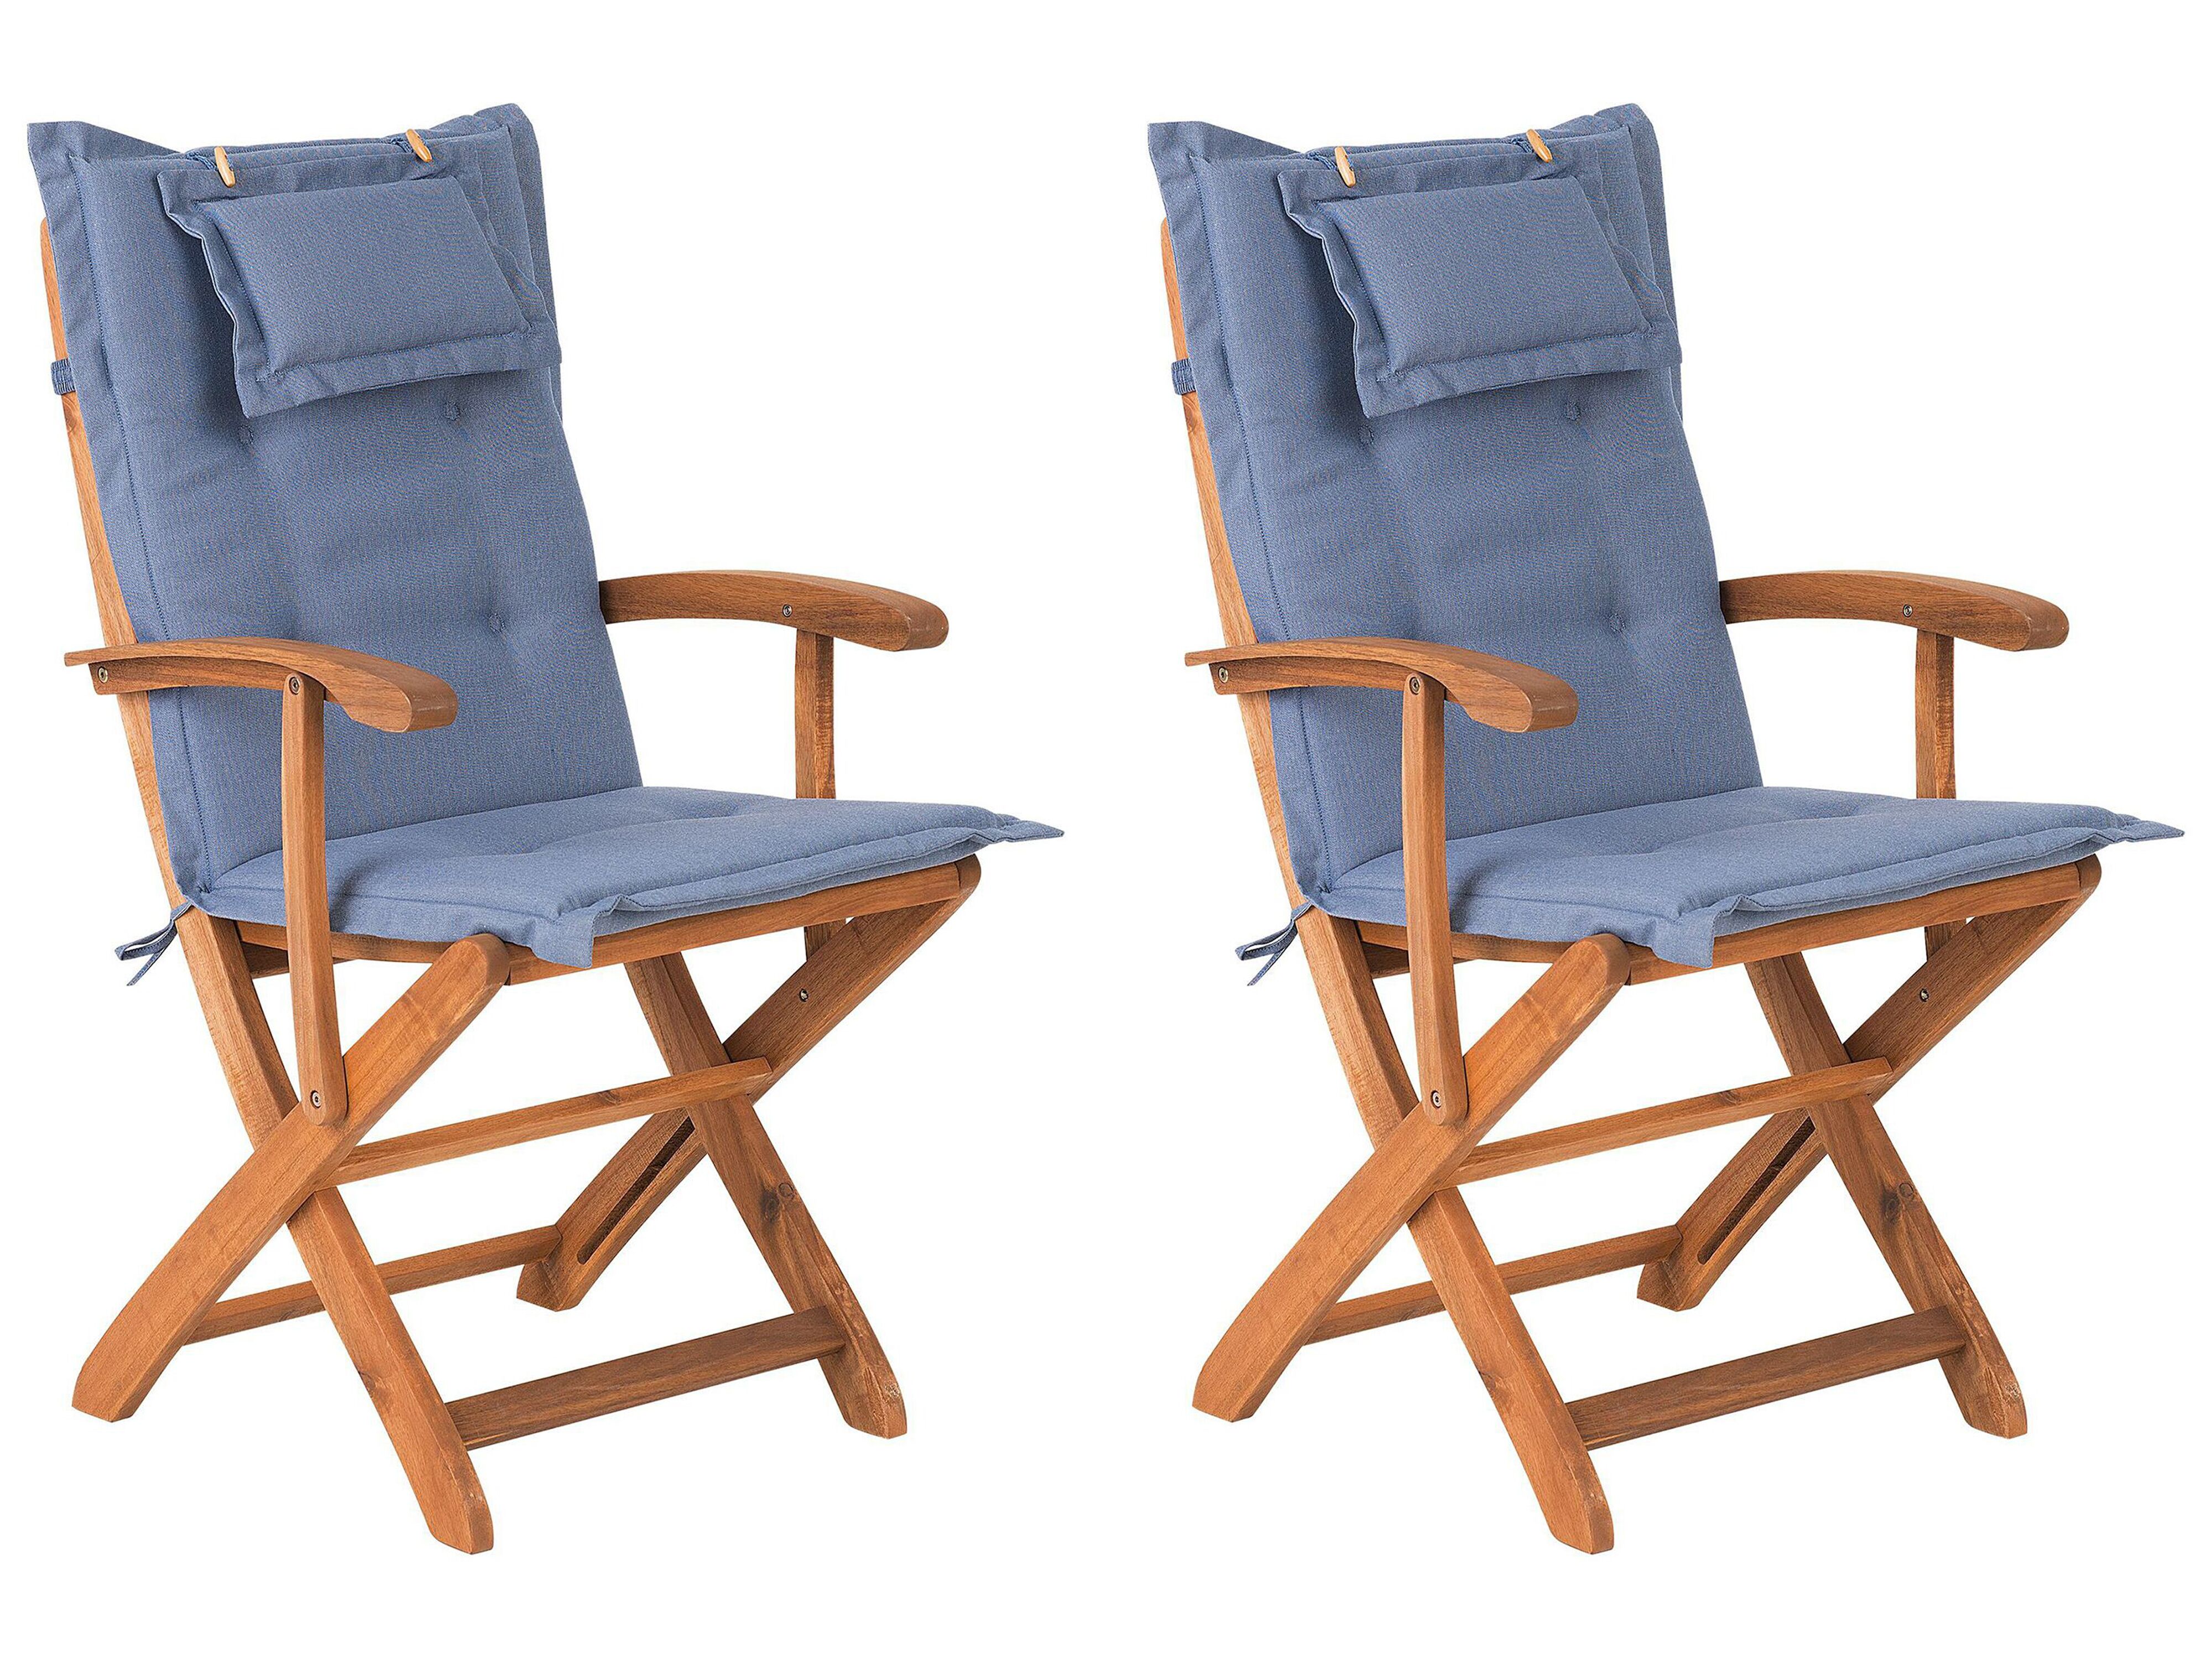 Set of 2 Cushions with MAUI Folding Garden Blue Chairs